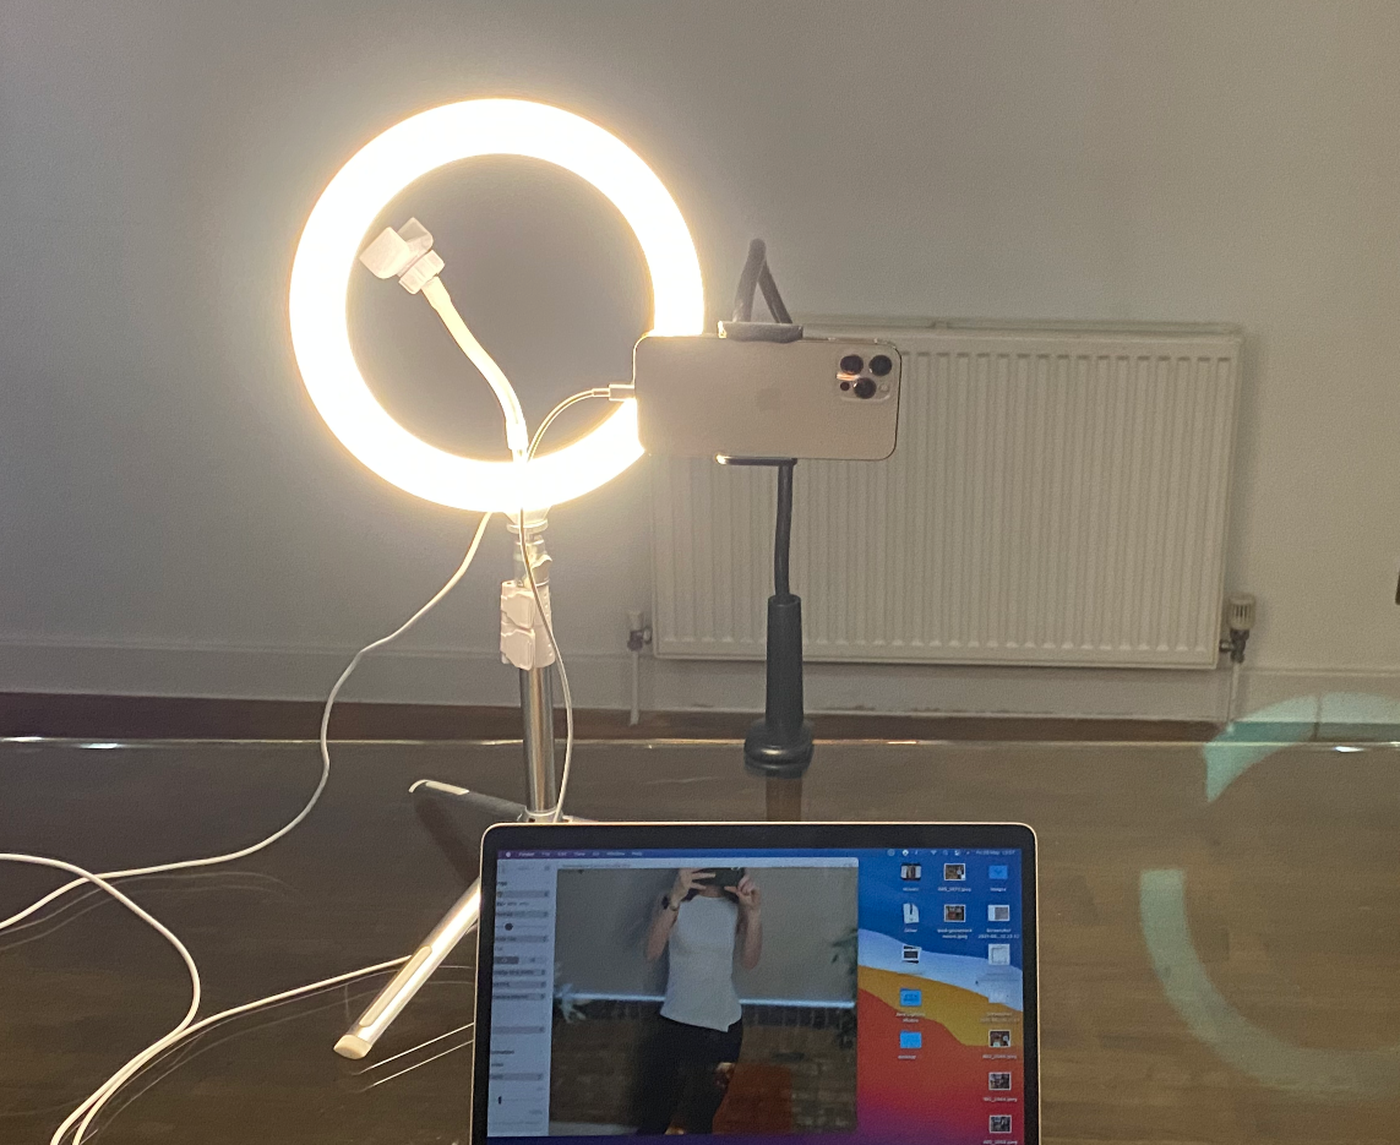 What we bought: This LED desk lamp gave me the best lighting for video calls